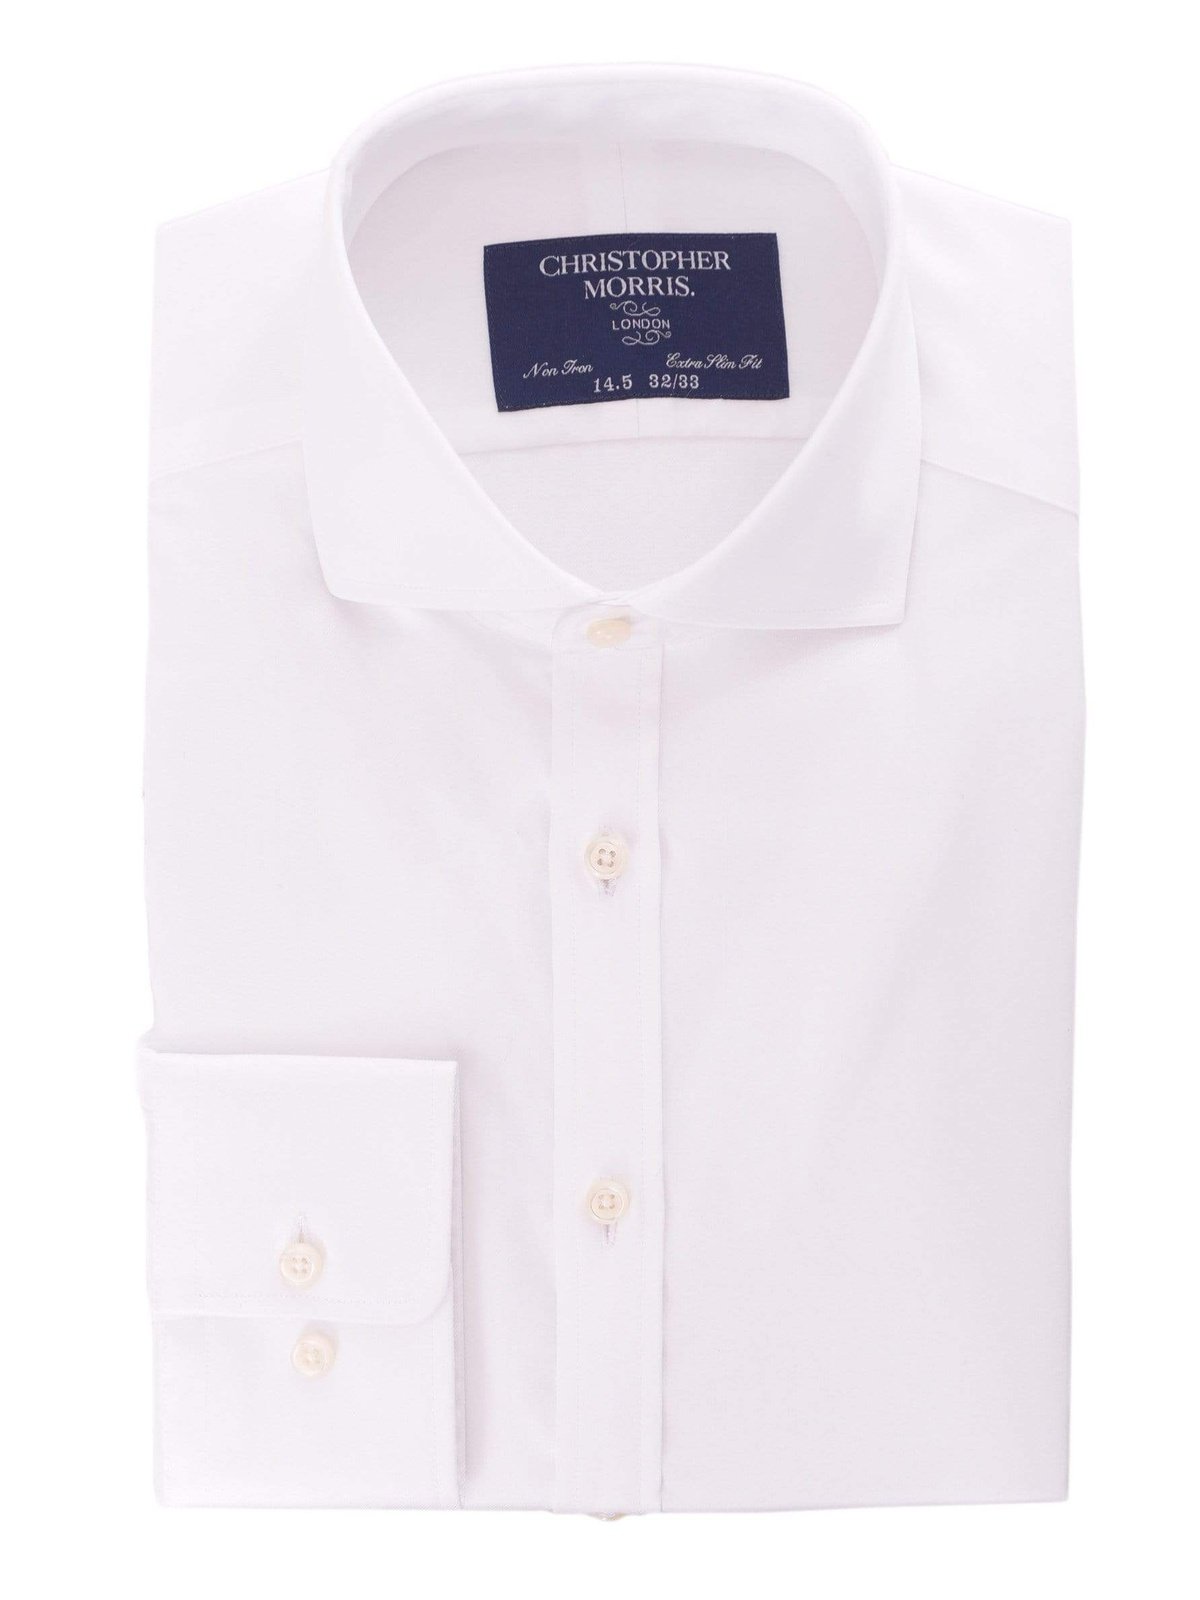 Christopher Morris SHIRTS 14 1/2 32/33 Mens Extra Slim Fit Solid White Twill Spread Collar Non Iron Cotton Dress Shirt